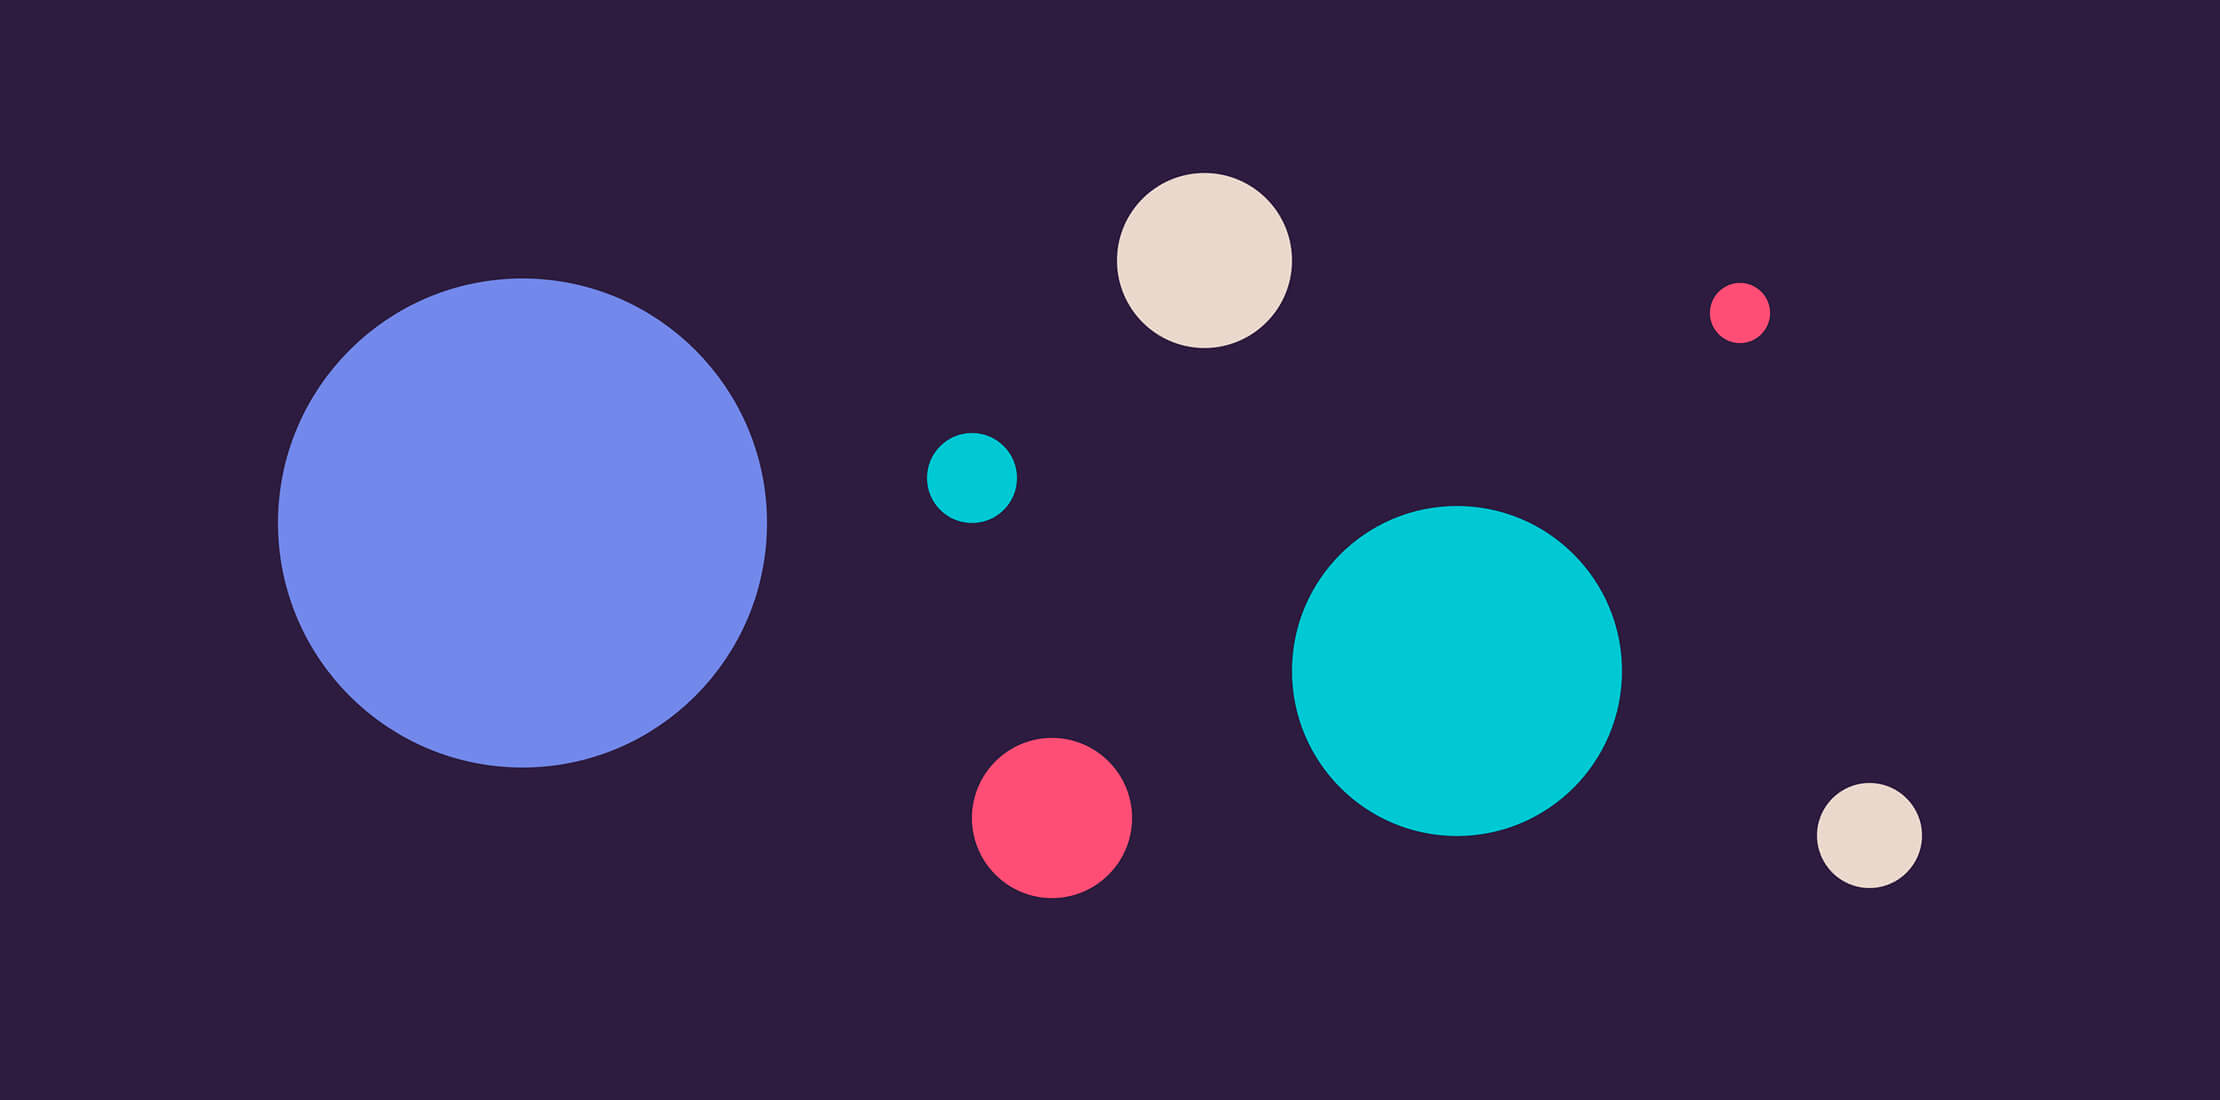 Circles of varying sizes and colours scattered on dark purple background